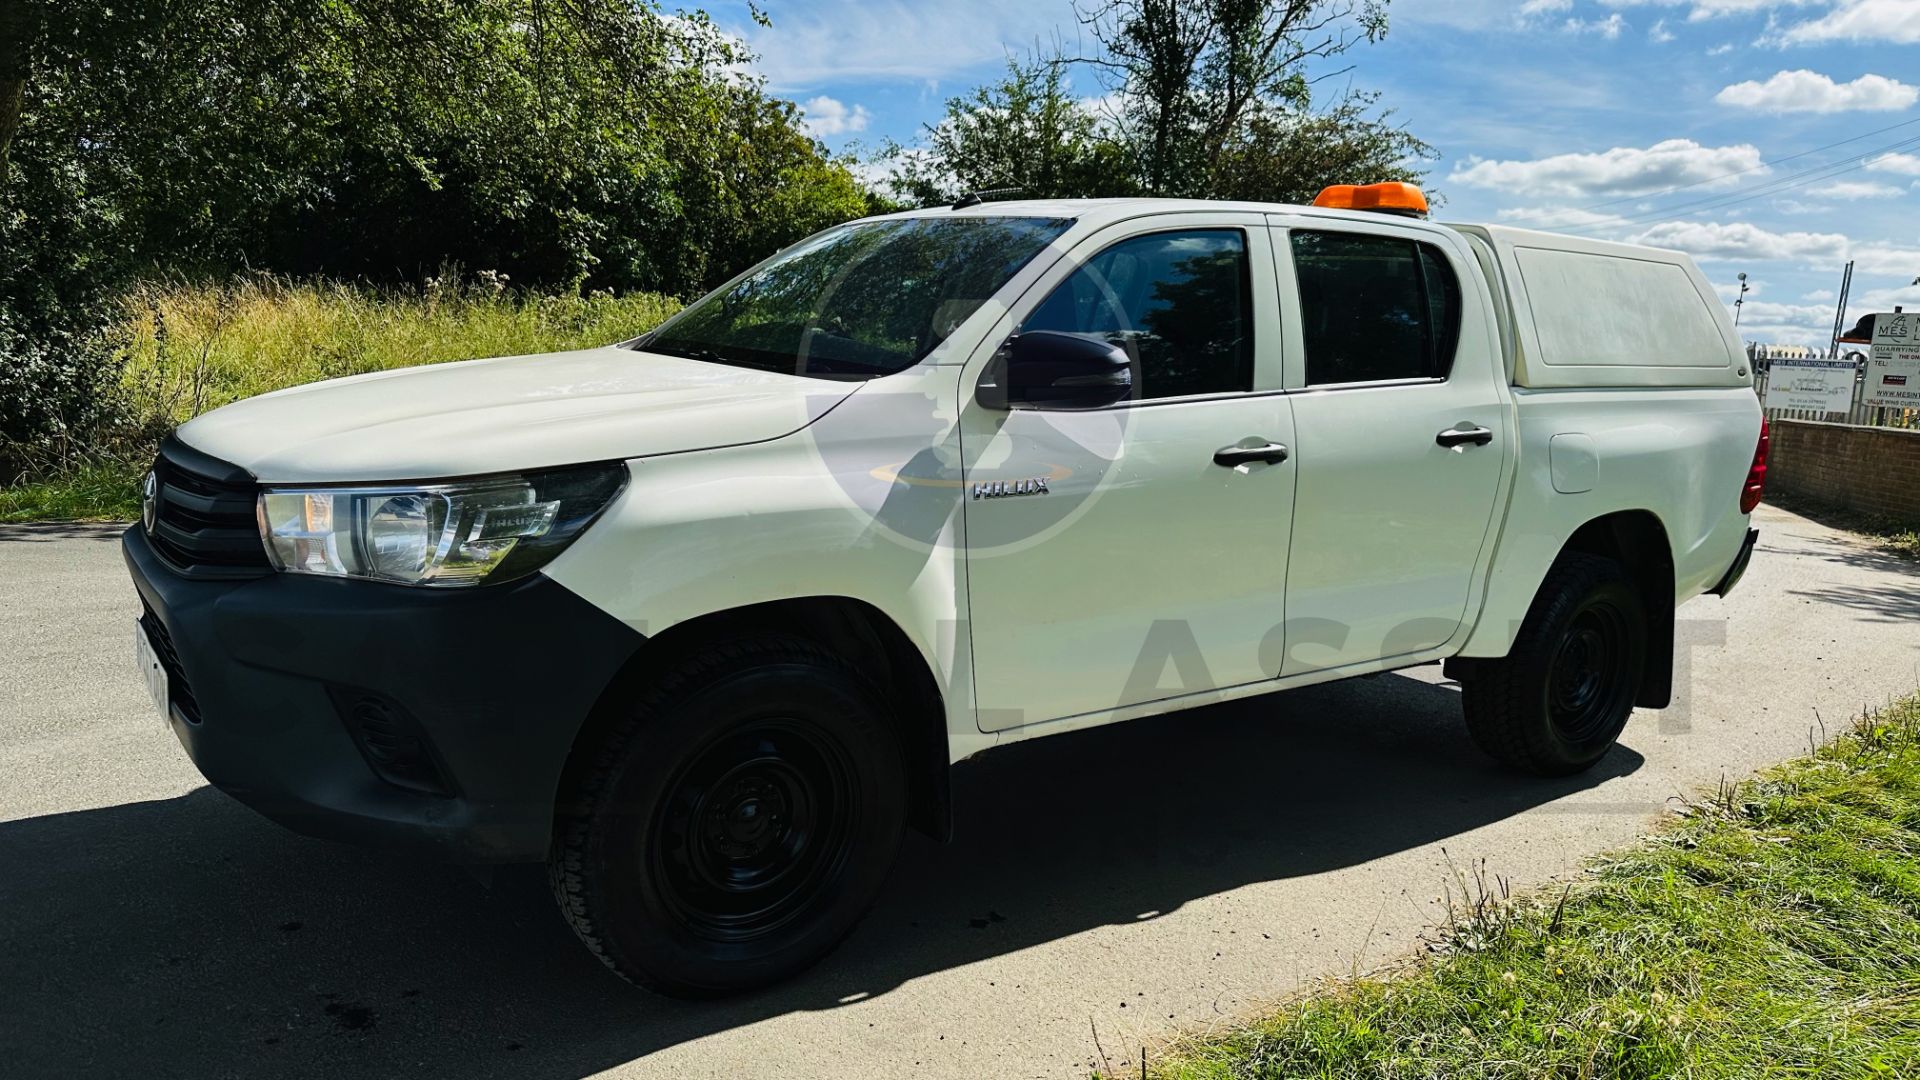 (ON SALE) TOYOTA HILUX *DOUBLE CAB PICK-UP* (2018 - EURO 6) 2.4 D-4D - AUTO STOP/START *AIR CON* - Image 6 of 41